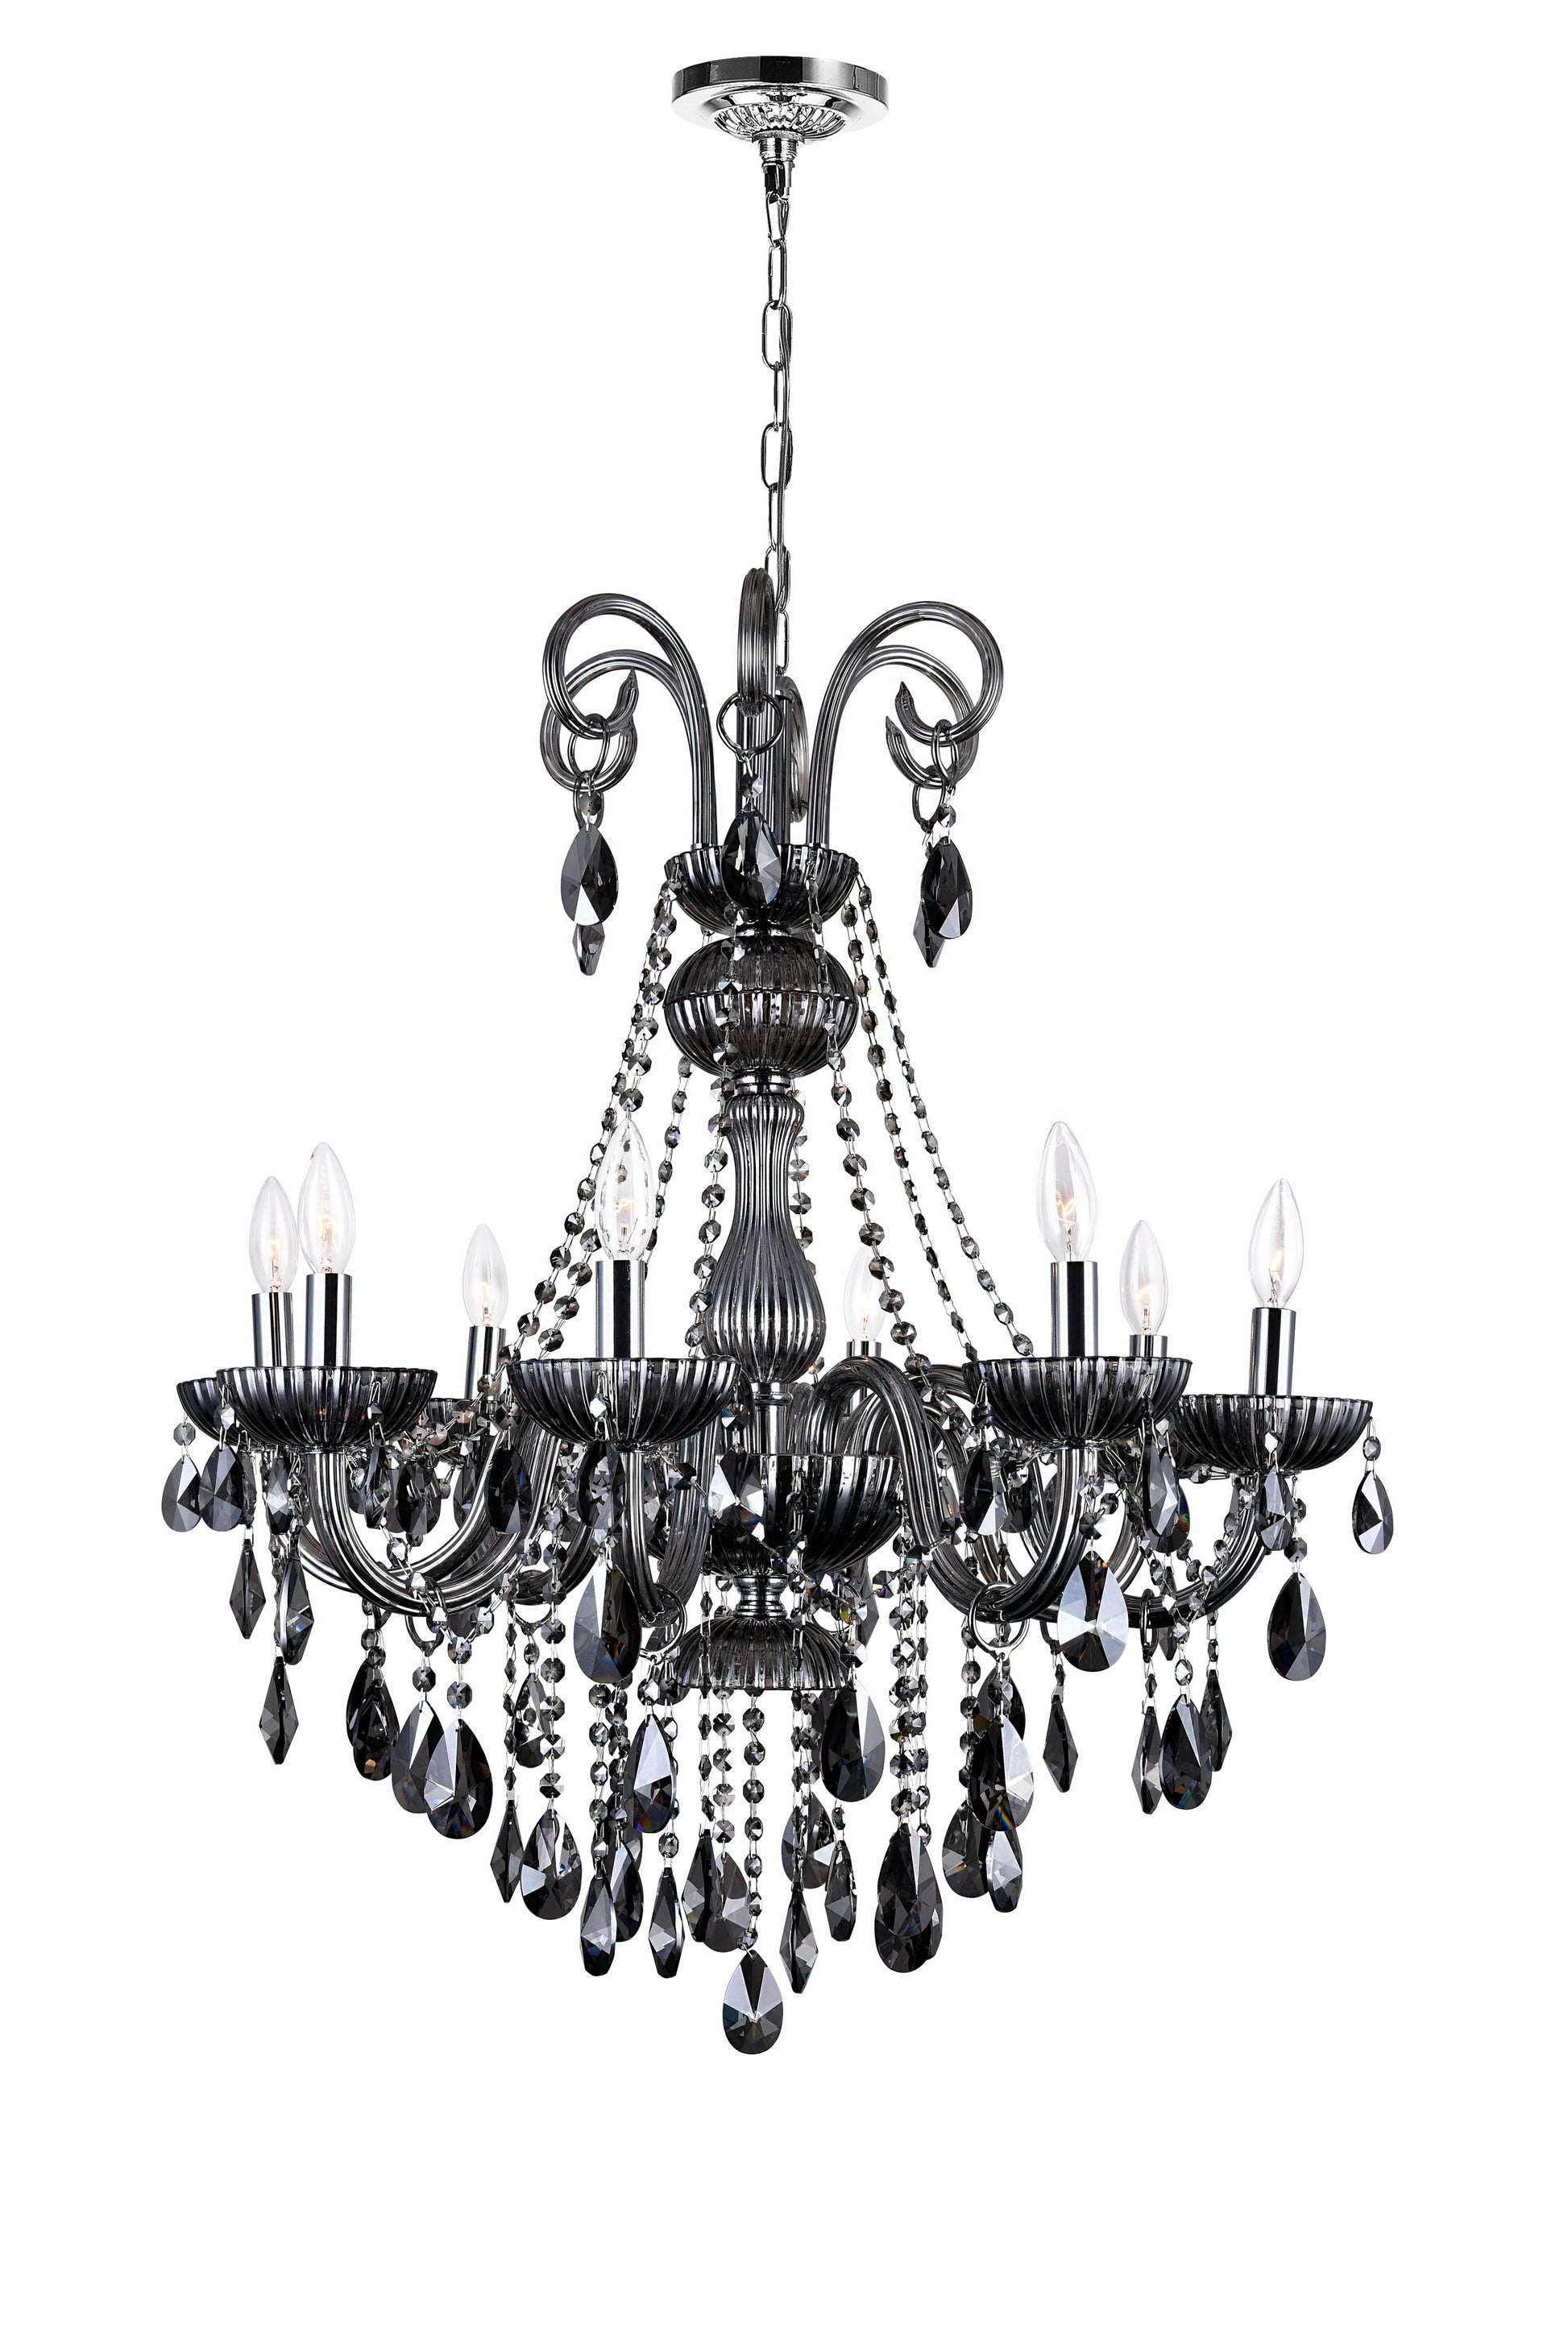 8 LIGHT UP CHANDELIER WITH CHROME FINISH - Dreamart Gallery